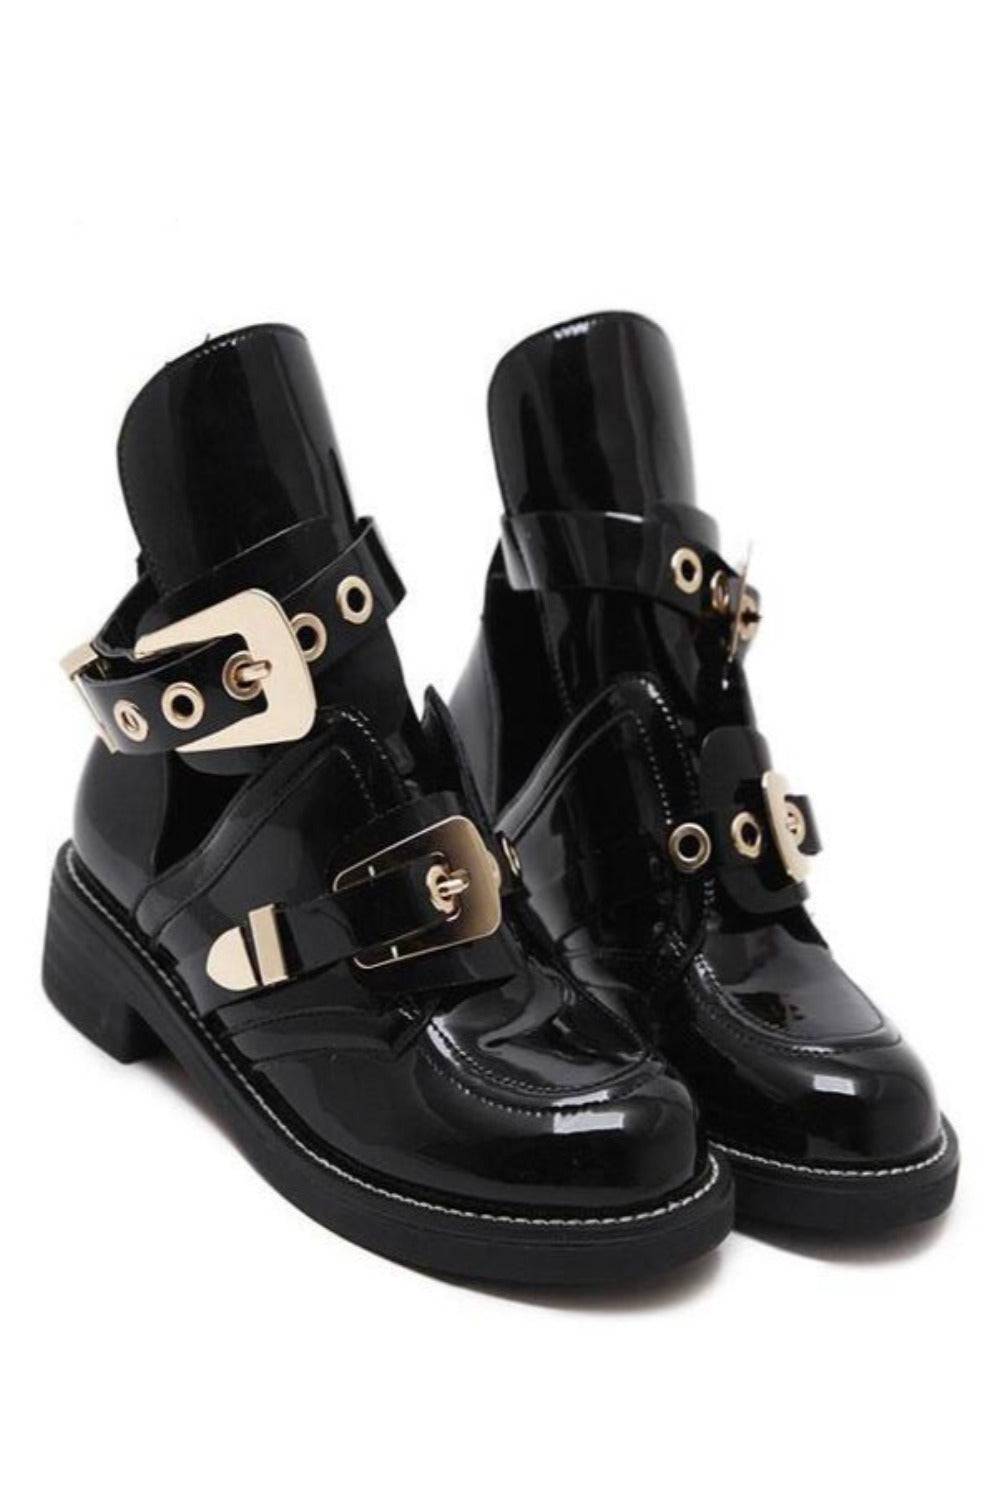 Let It Be Gold Buckle Black Ankle Boots - TGC Boutique - Ankle Booties